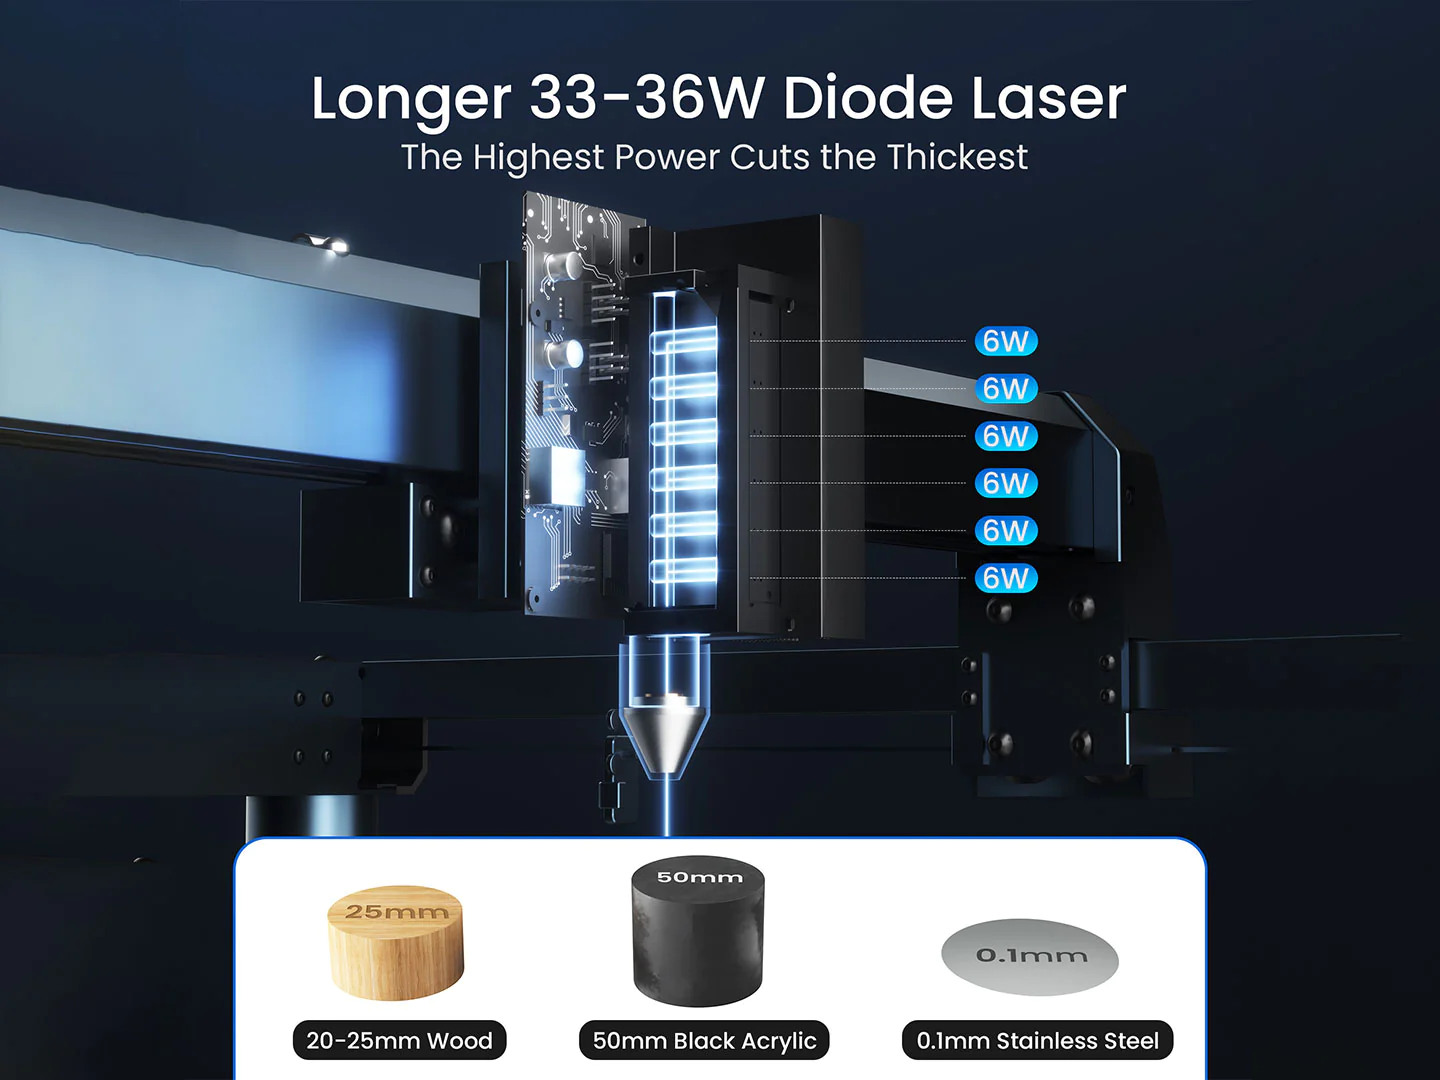 Atomstack S 30 PRO 6-core laser engraving machine with 30W diode is very  fast. 